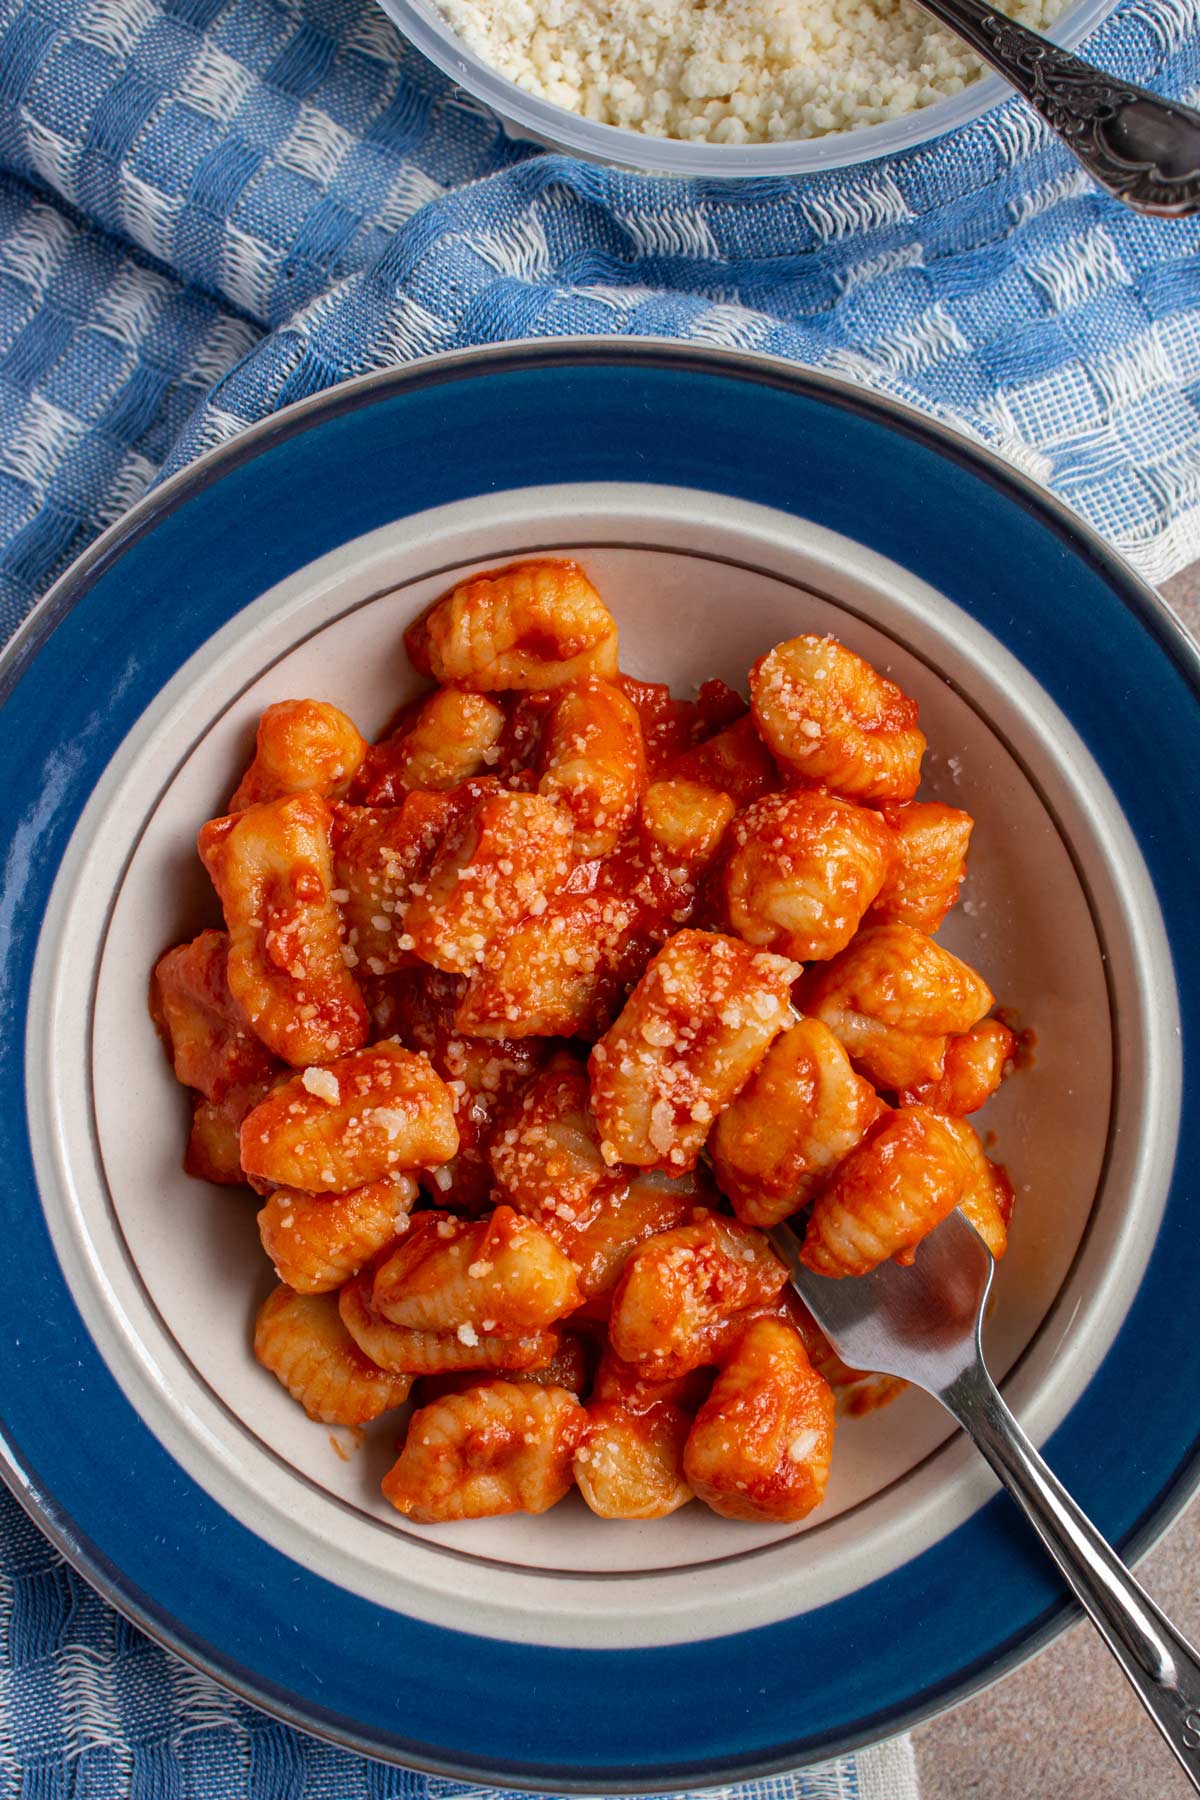 Small gnocchi dumplings in red sauce in a small shallow bowl with blue edges.